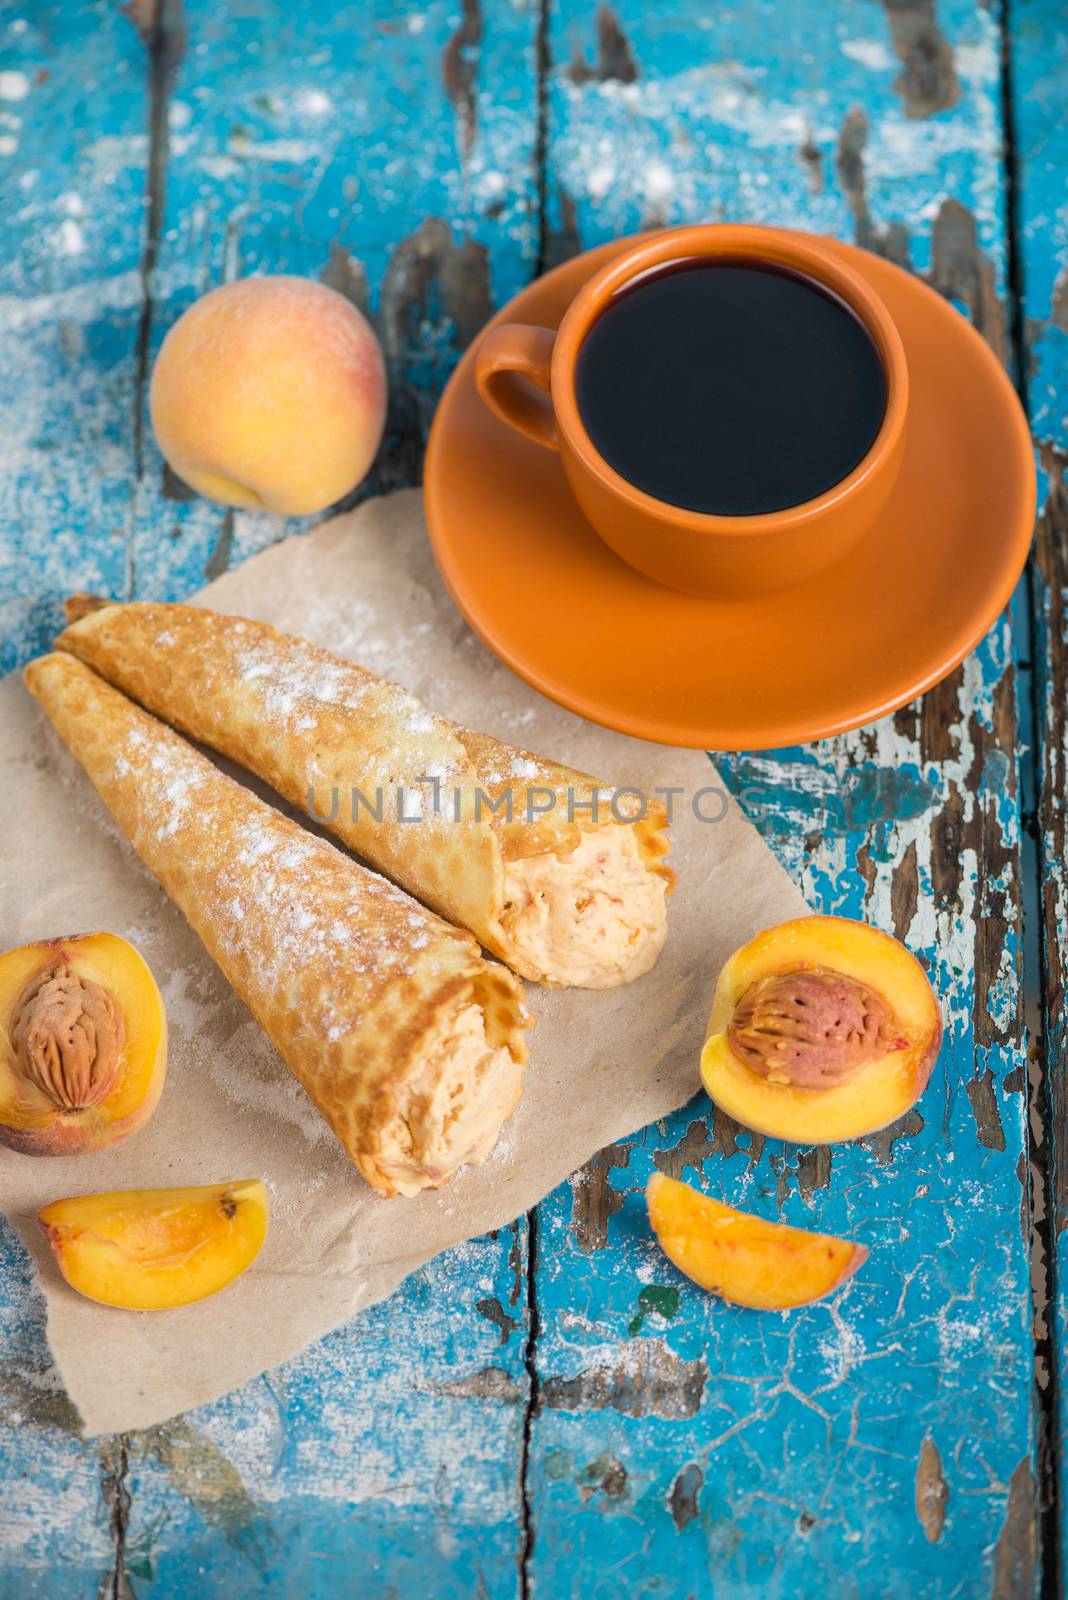 Good morning, Have a nice day. A cup of coffee, delicious waffles with peach ice cream decorated with icing sugar and fresh peaches on old blue vintage wooden background, vertical